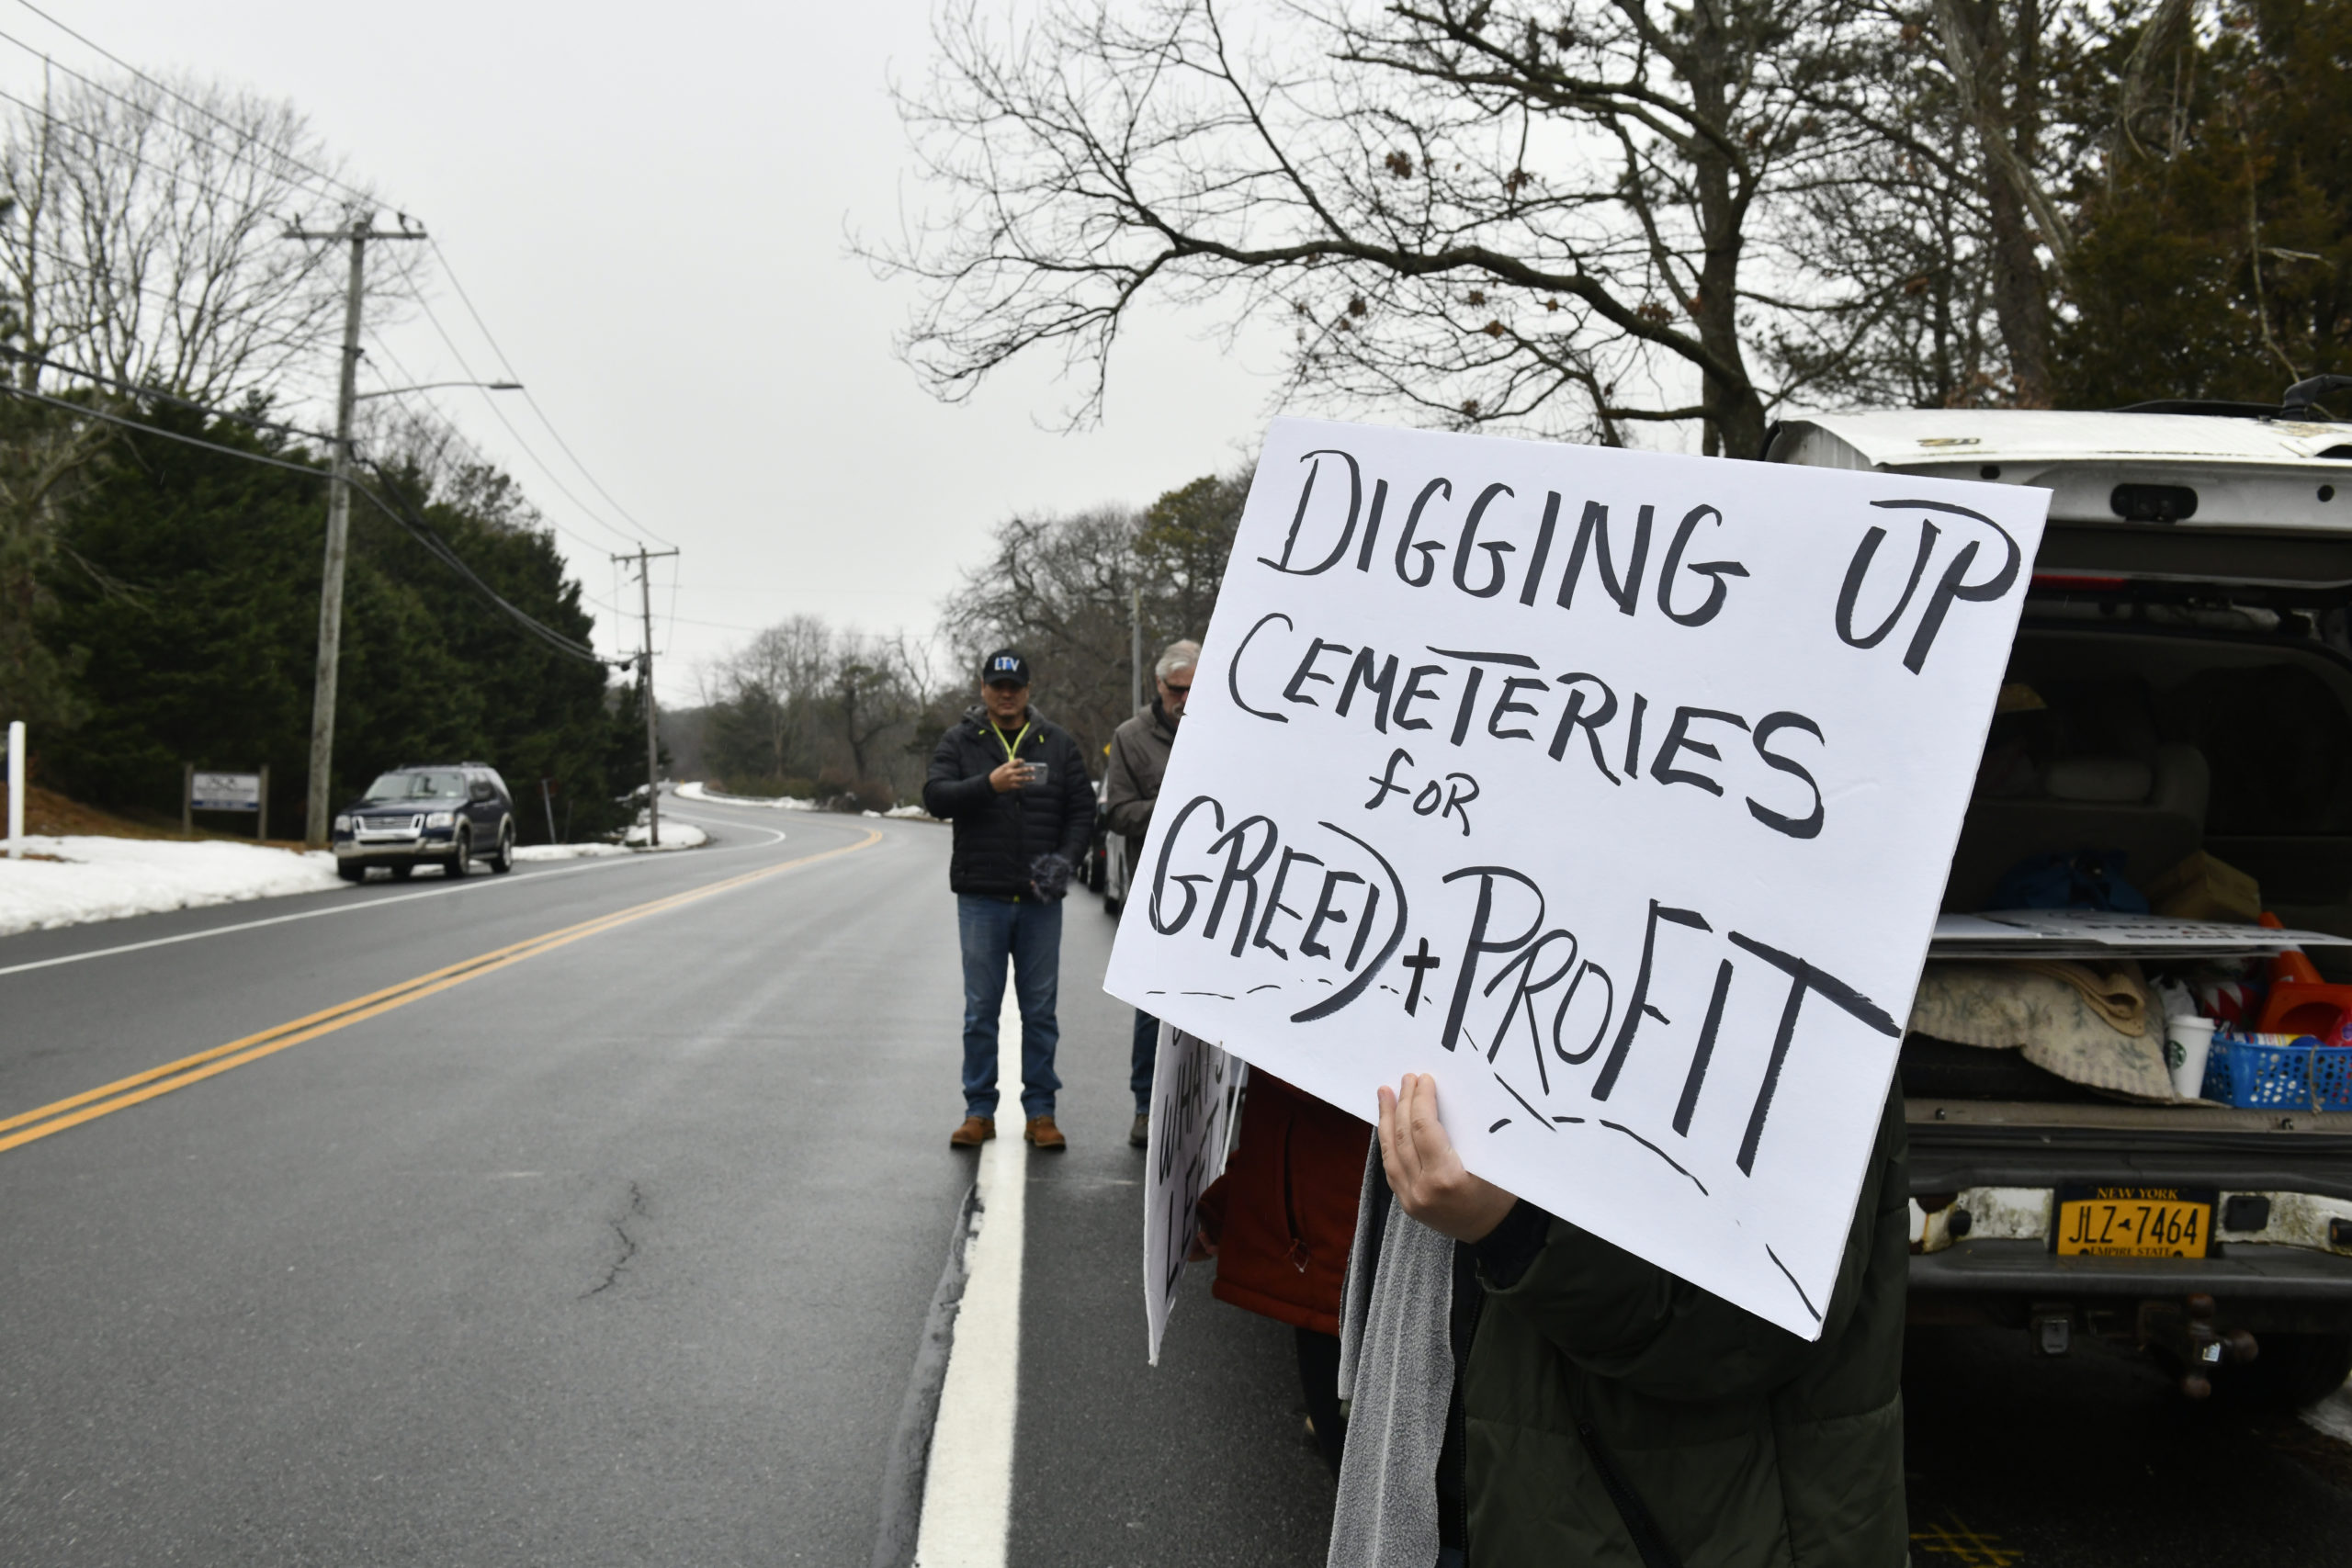 Protestors gathered on Montauk Highway in Shinnecock Hills against Southampton Town's failure to protect sacred land from development on Monday. DANA SHAW